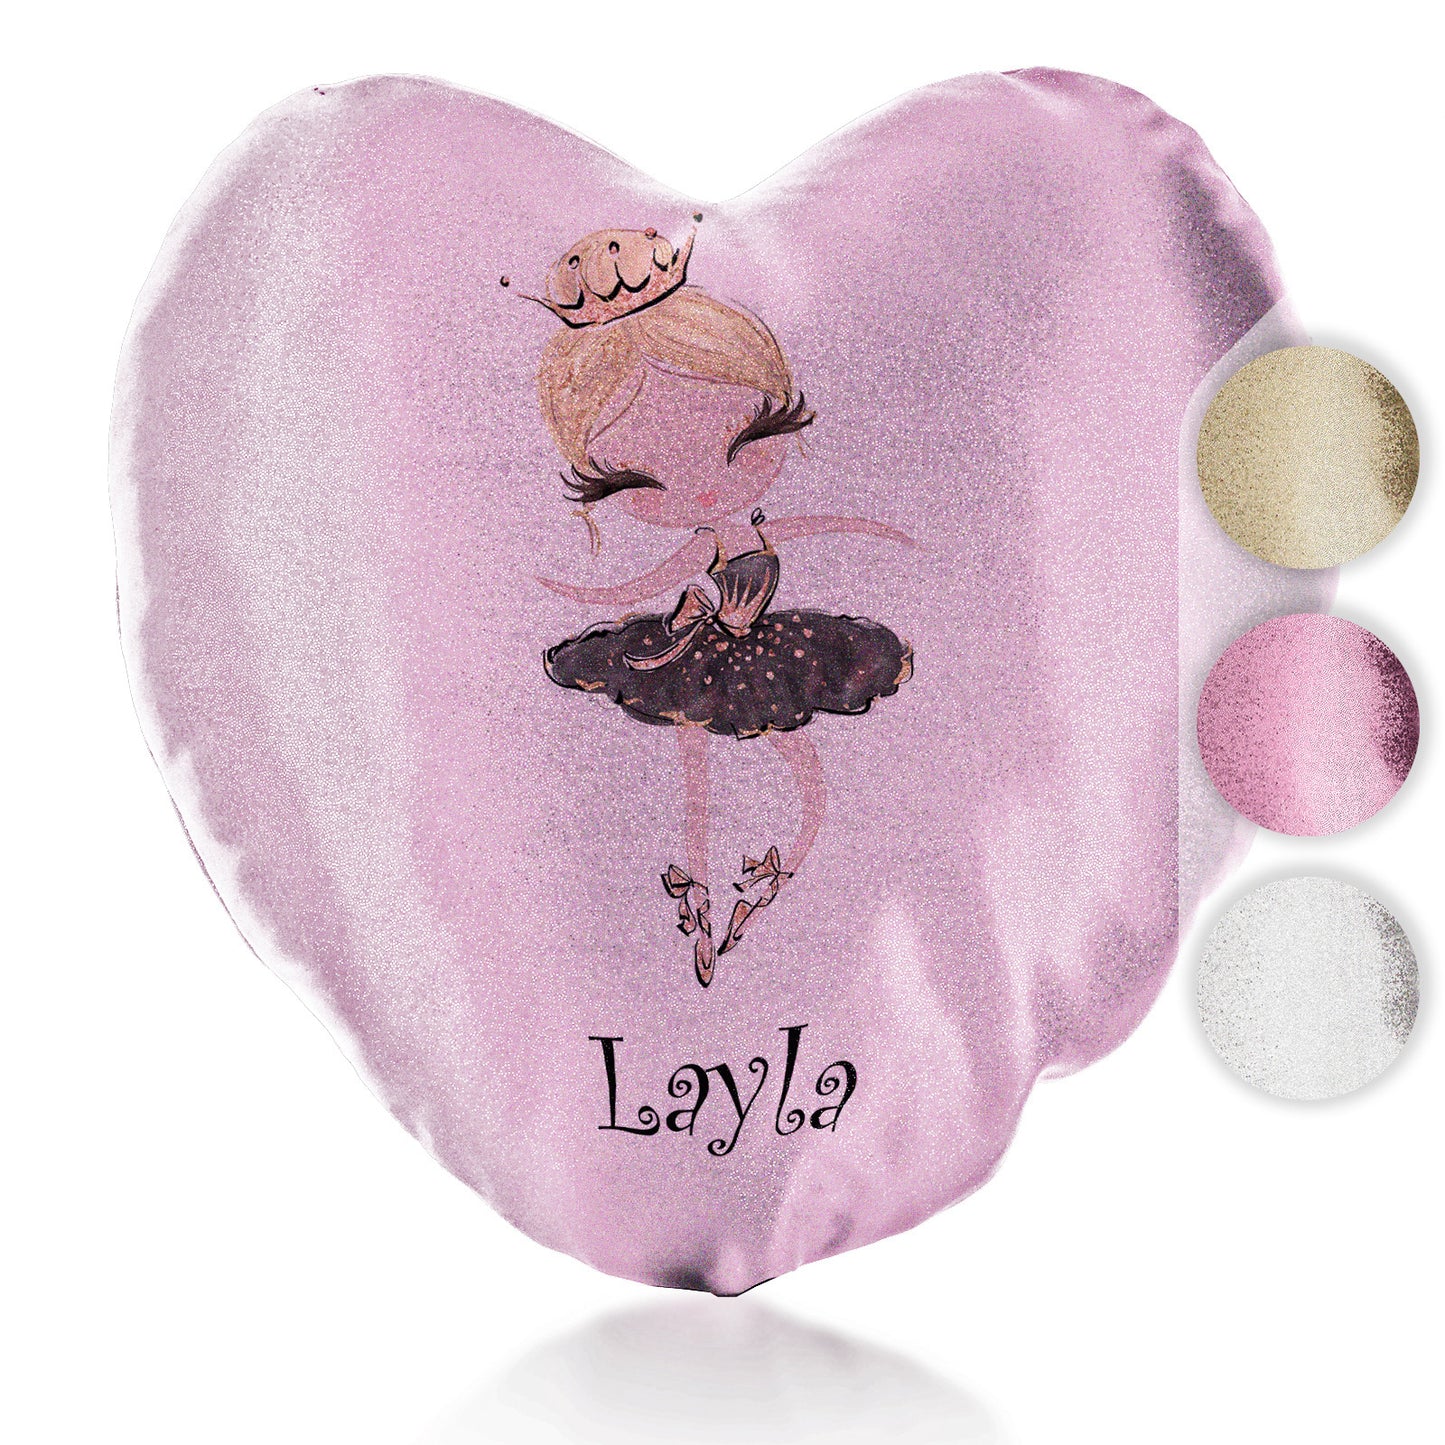 Personalised Glitter Heart Cushion with Cute Text and Blonde Hair Black Dress Tiara Ballerina